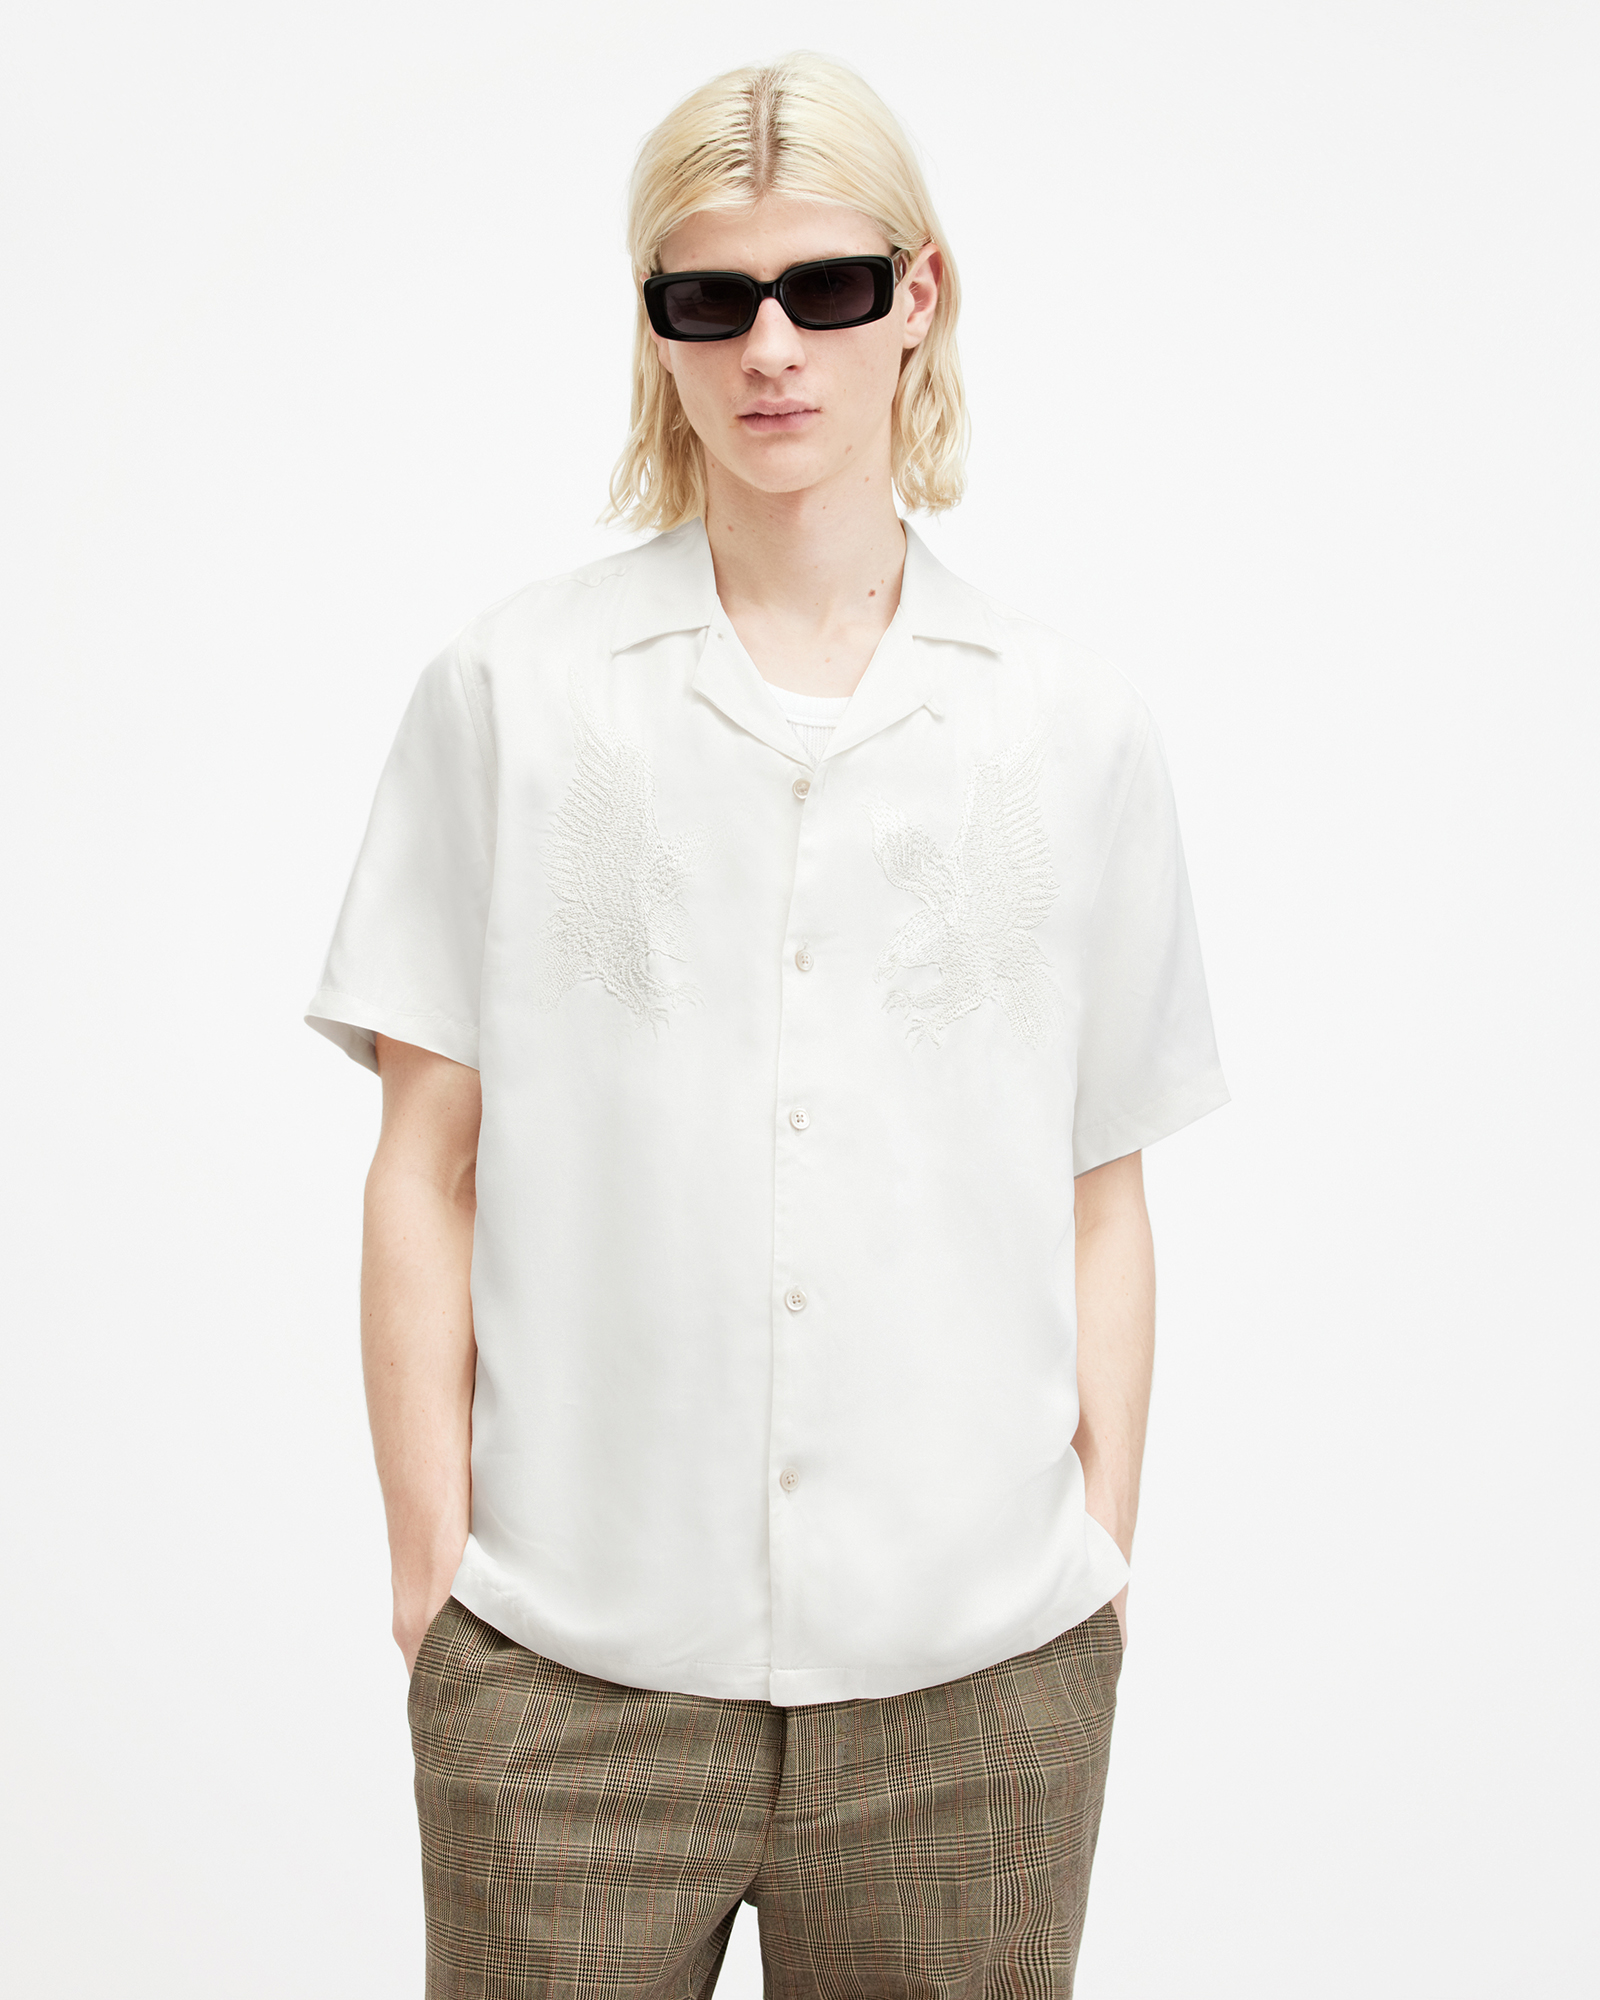 AllSaints Aquila Embroidered Relaxed Fit Shirt,, AVALON WHITE